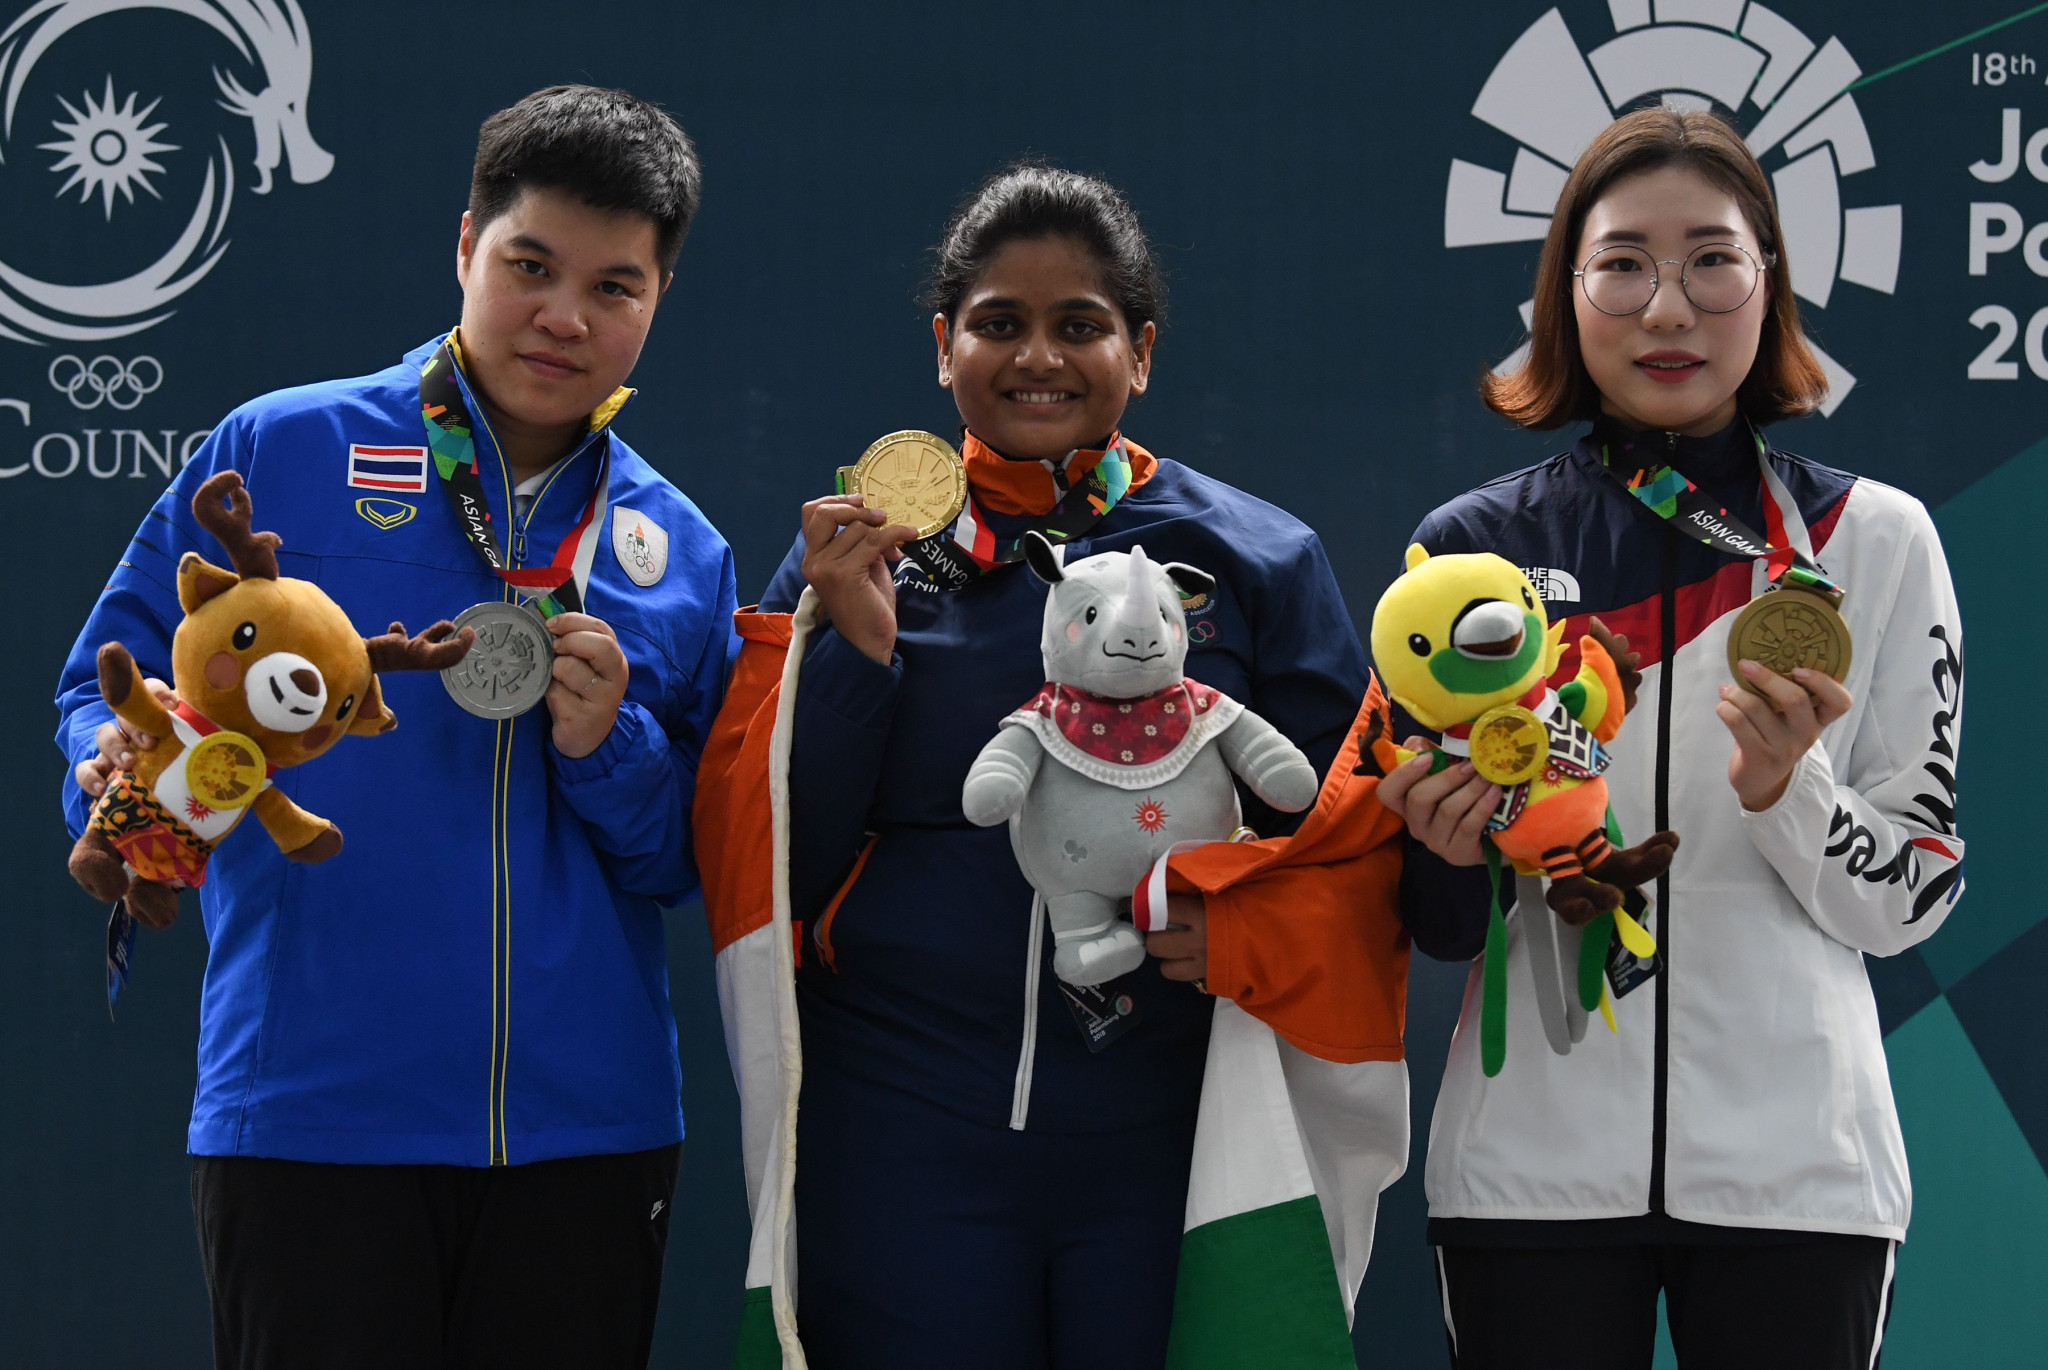 Thailand's Naphaswan Yangpaiboon, the 2018 Asian Games silver medallist, won the women's 25 metres pistol event at the Asian Shooting Championships in Doha ©Getty Images